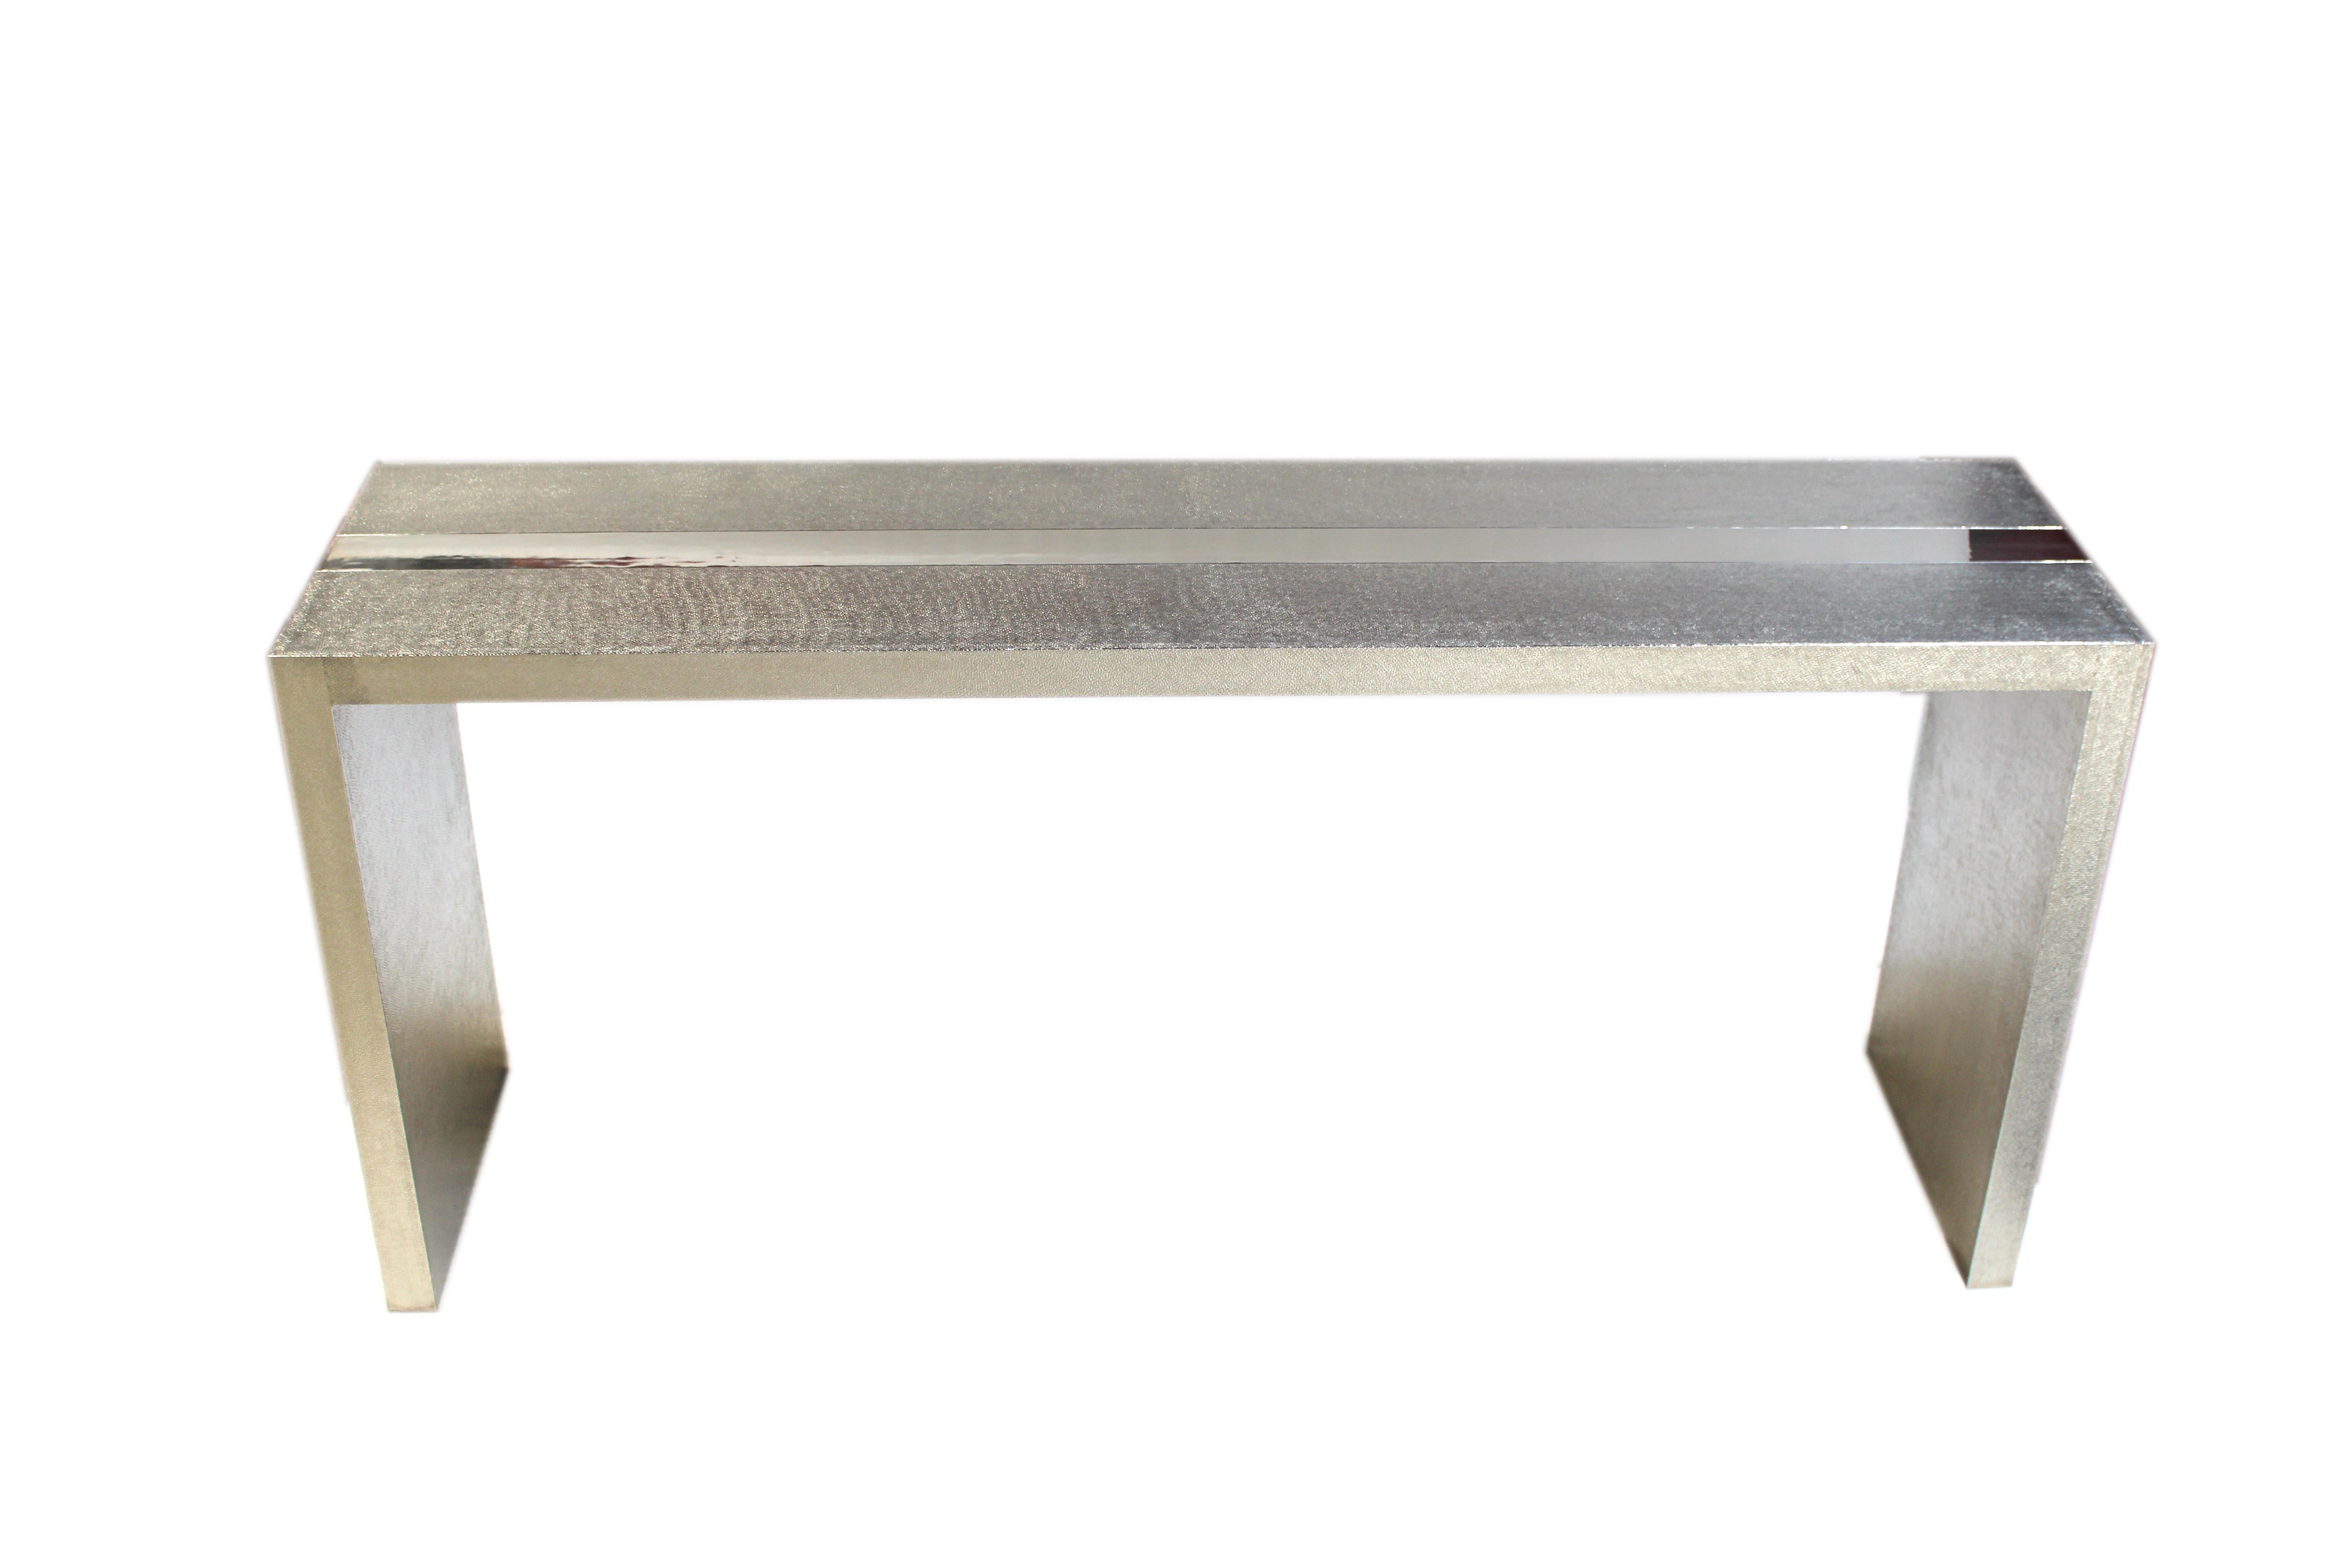 Art Deco Rectangular Console Tables Fine Hammered Antique Bronze by Alison Spear For Sale 7